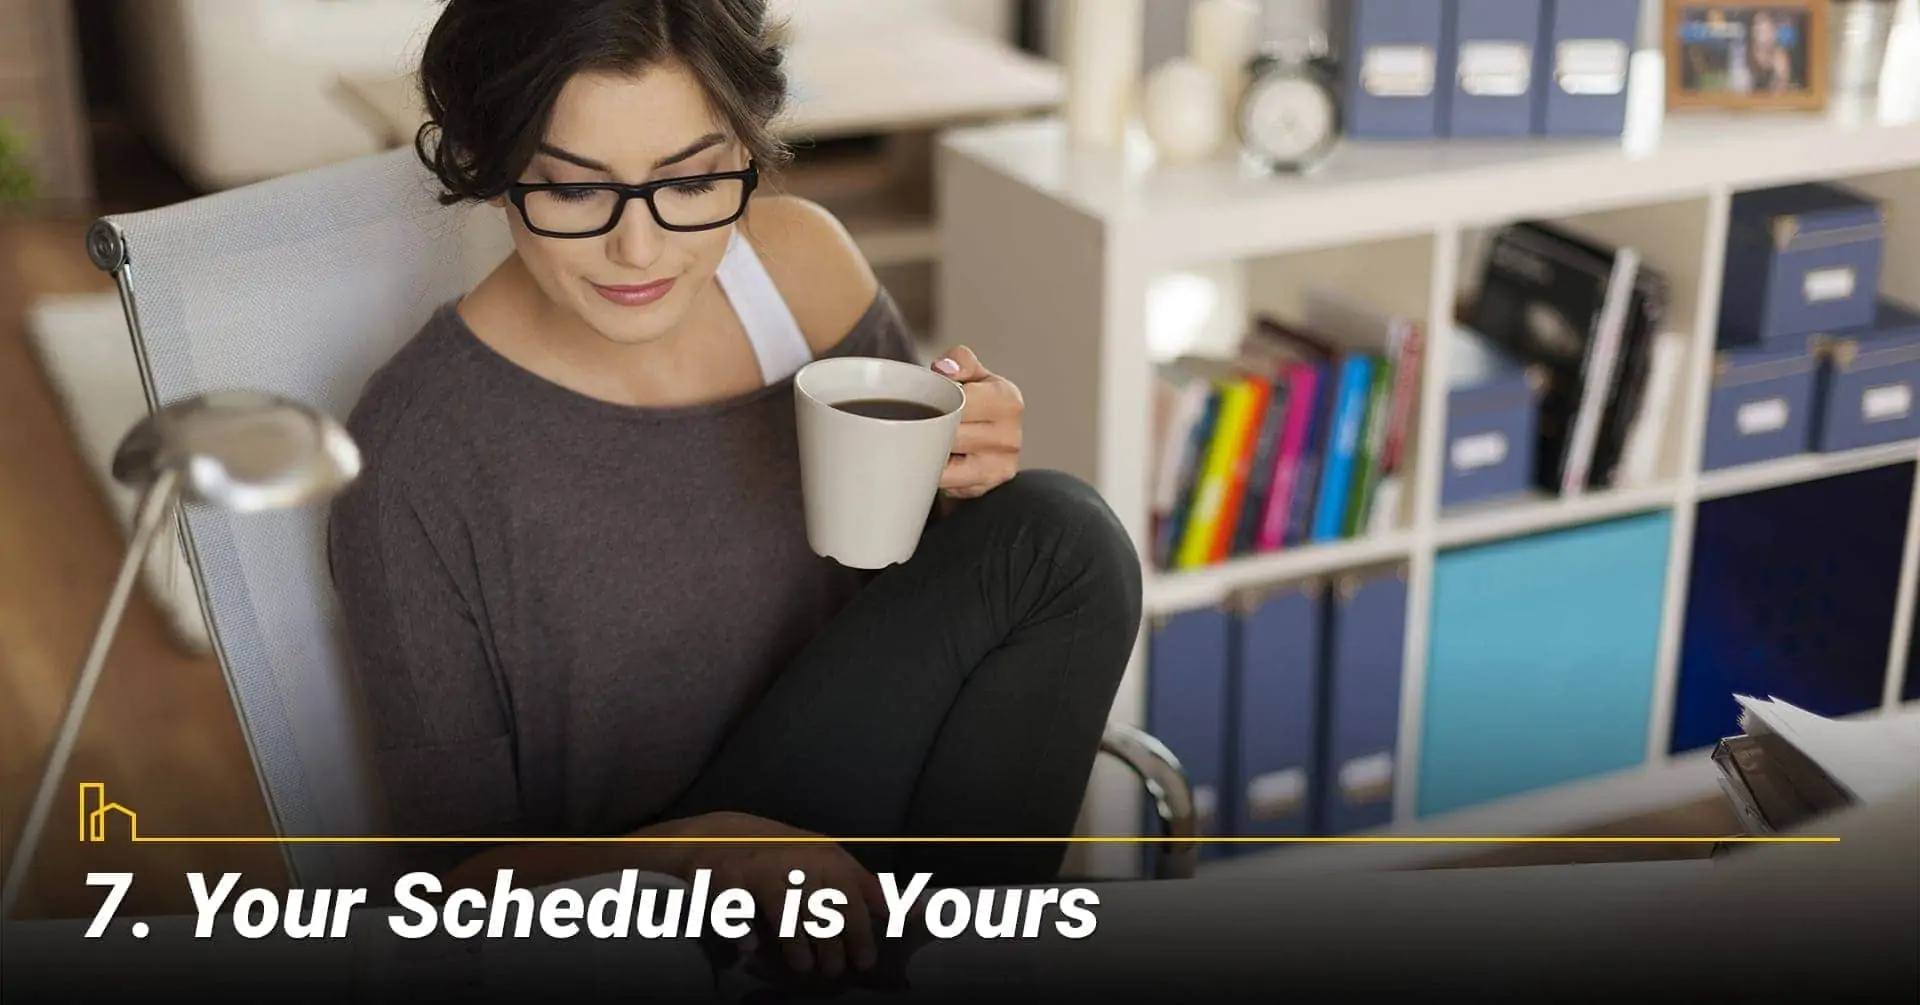 Your Schedule is Yours, gain control of your time